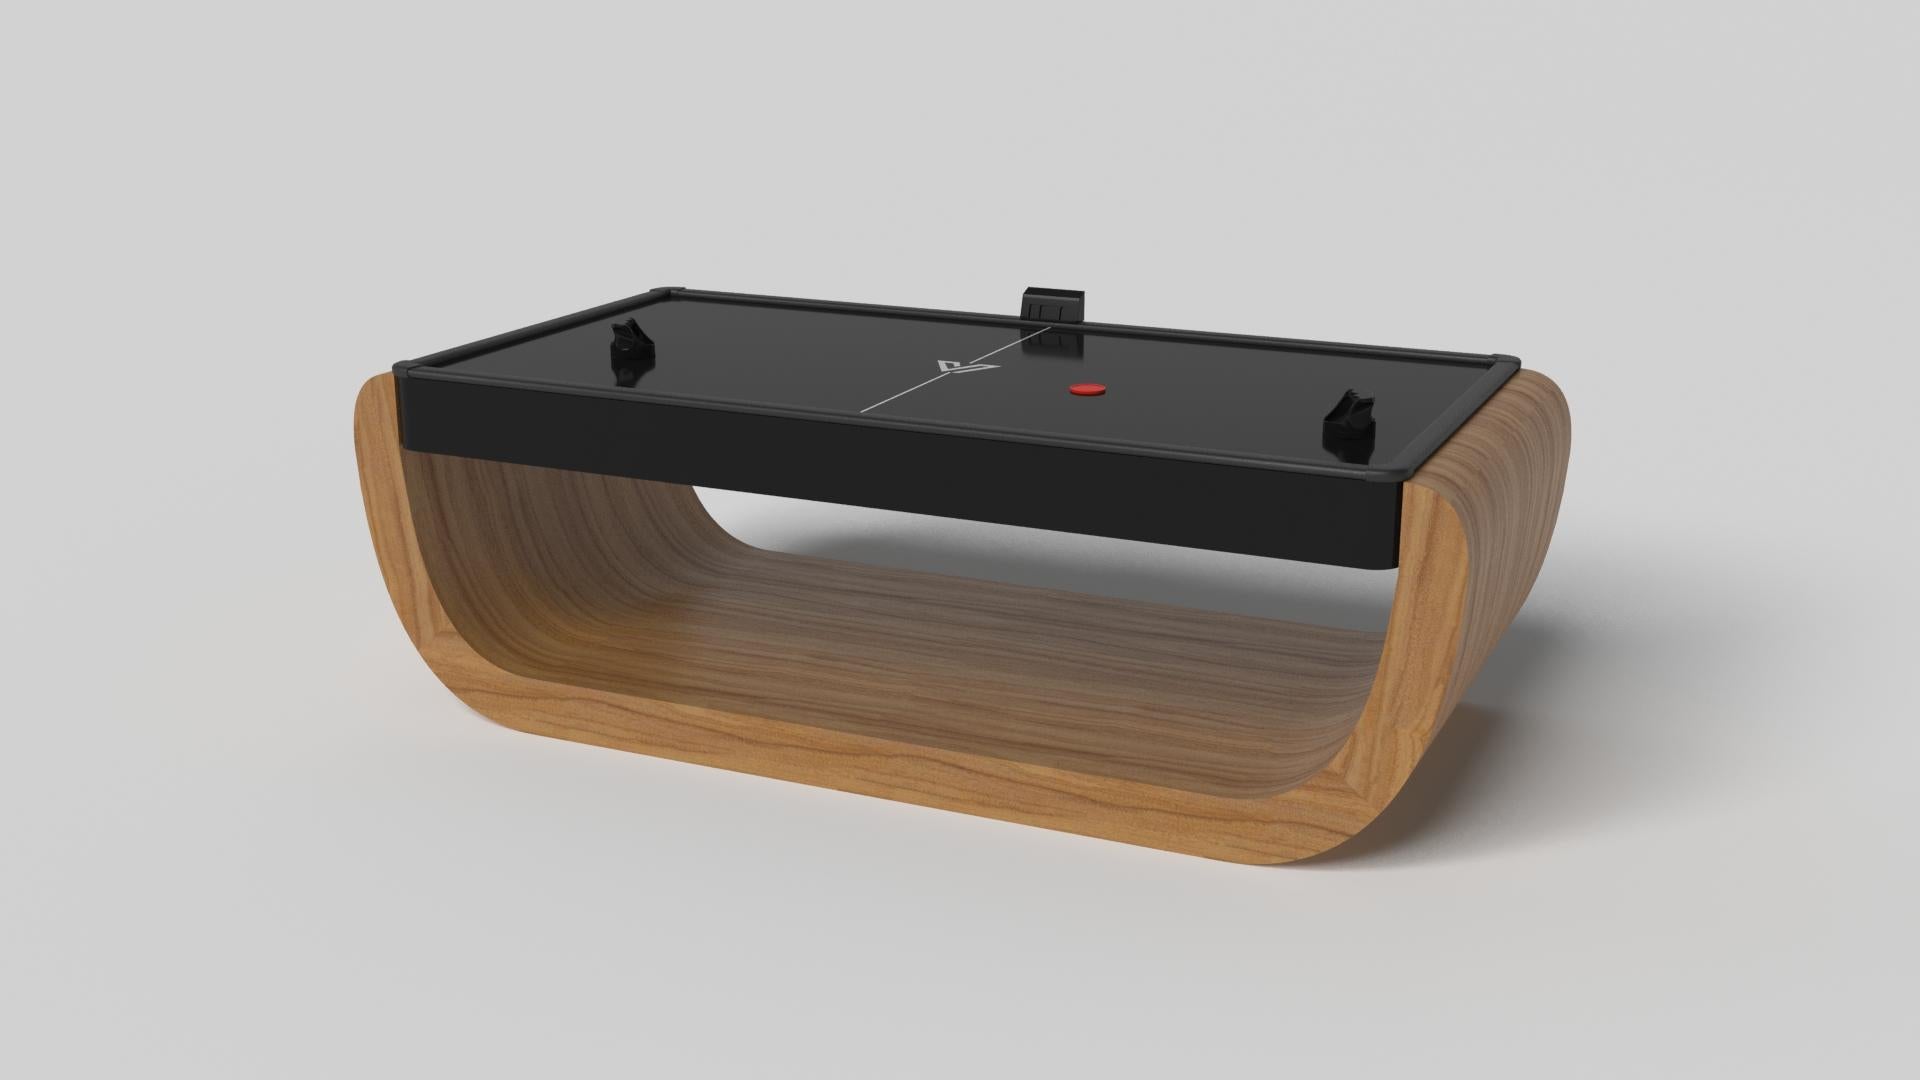 Handcrafted with intricate accents and a precision-carved curved base, the Sid air hockey table in black encompasses a series of smooth edges, distinctive details, and unconventional elements in one unique expression of luxury design. Built by hand